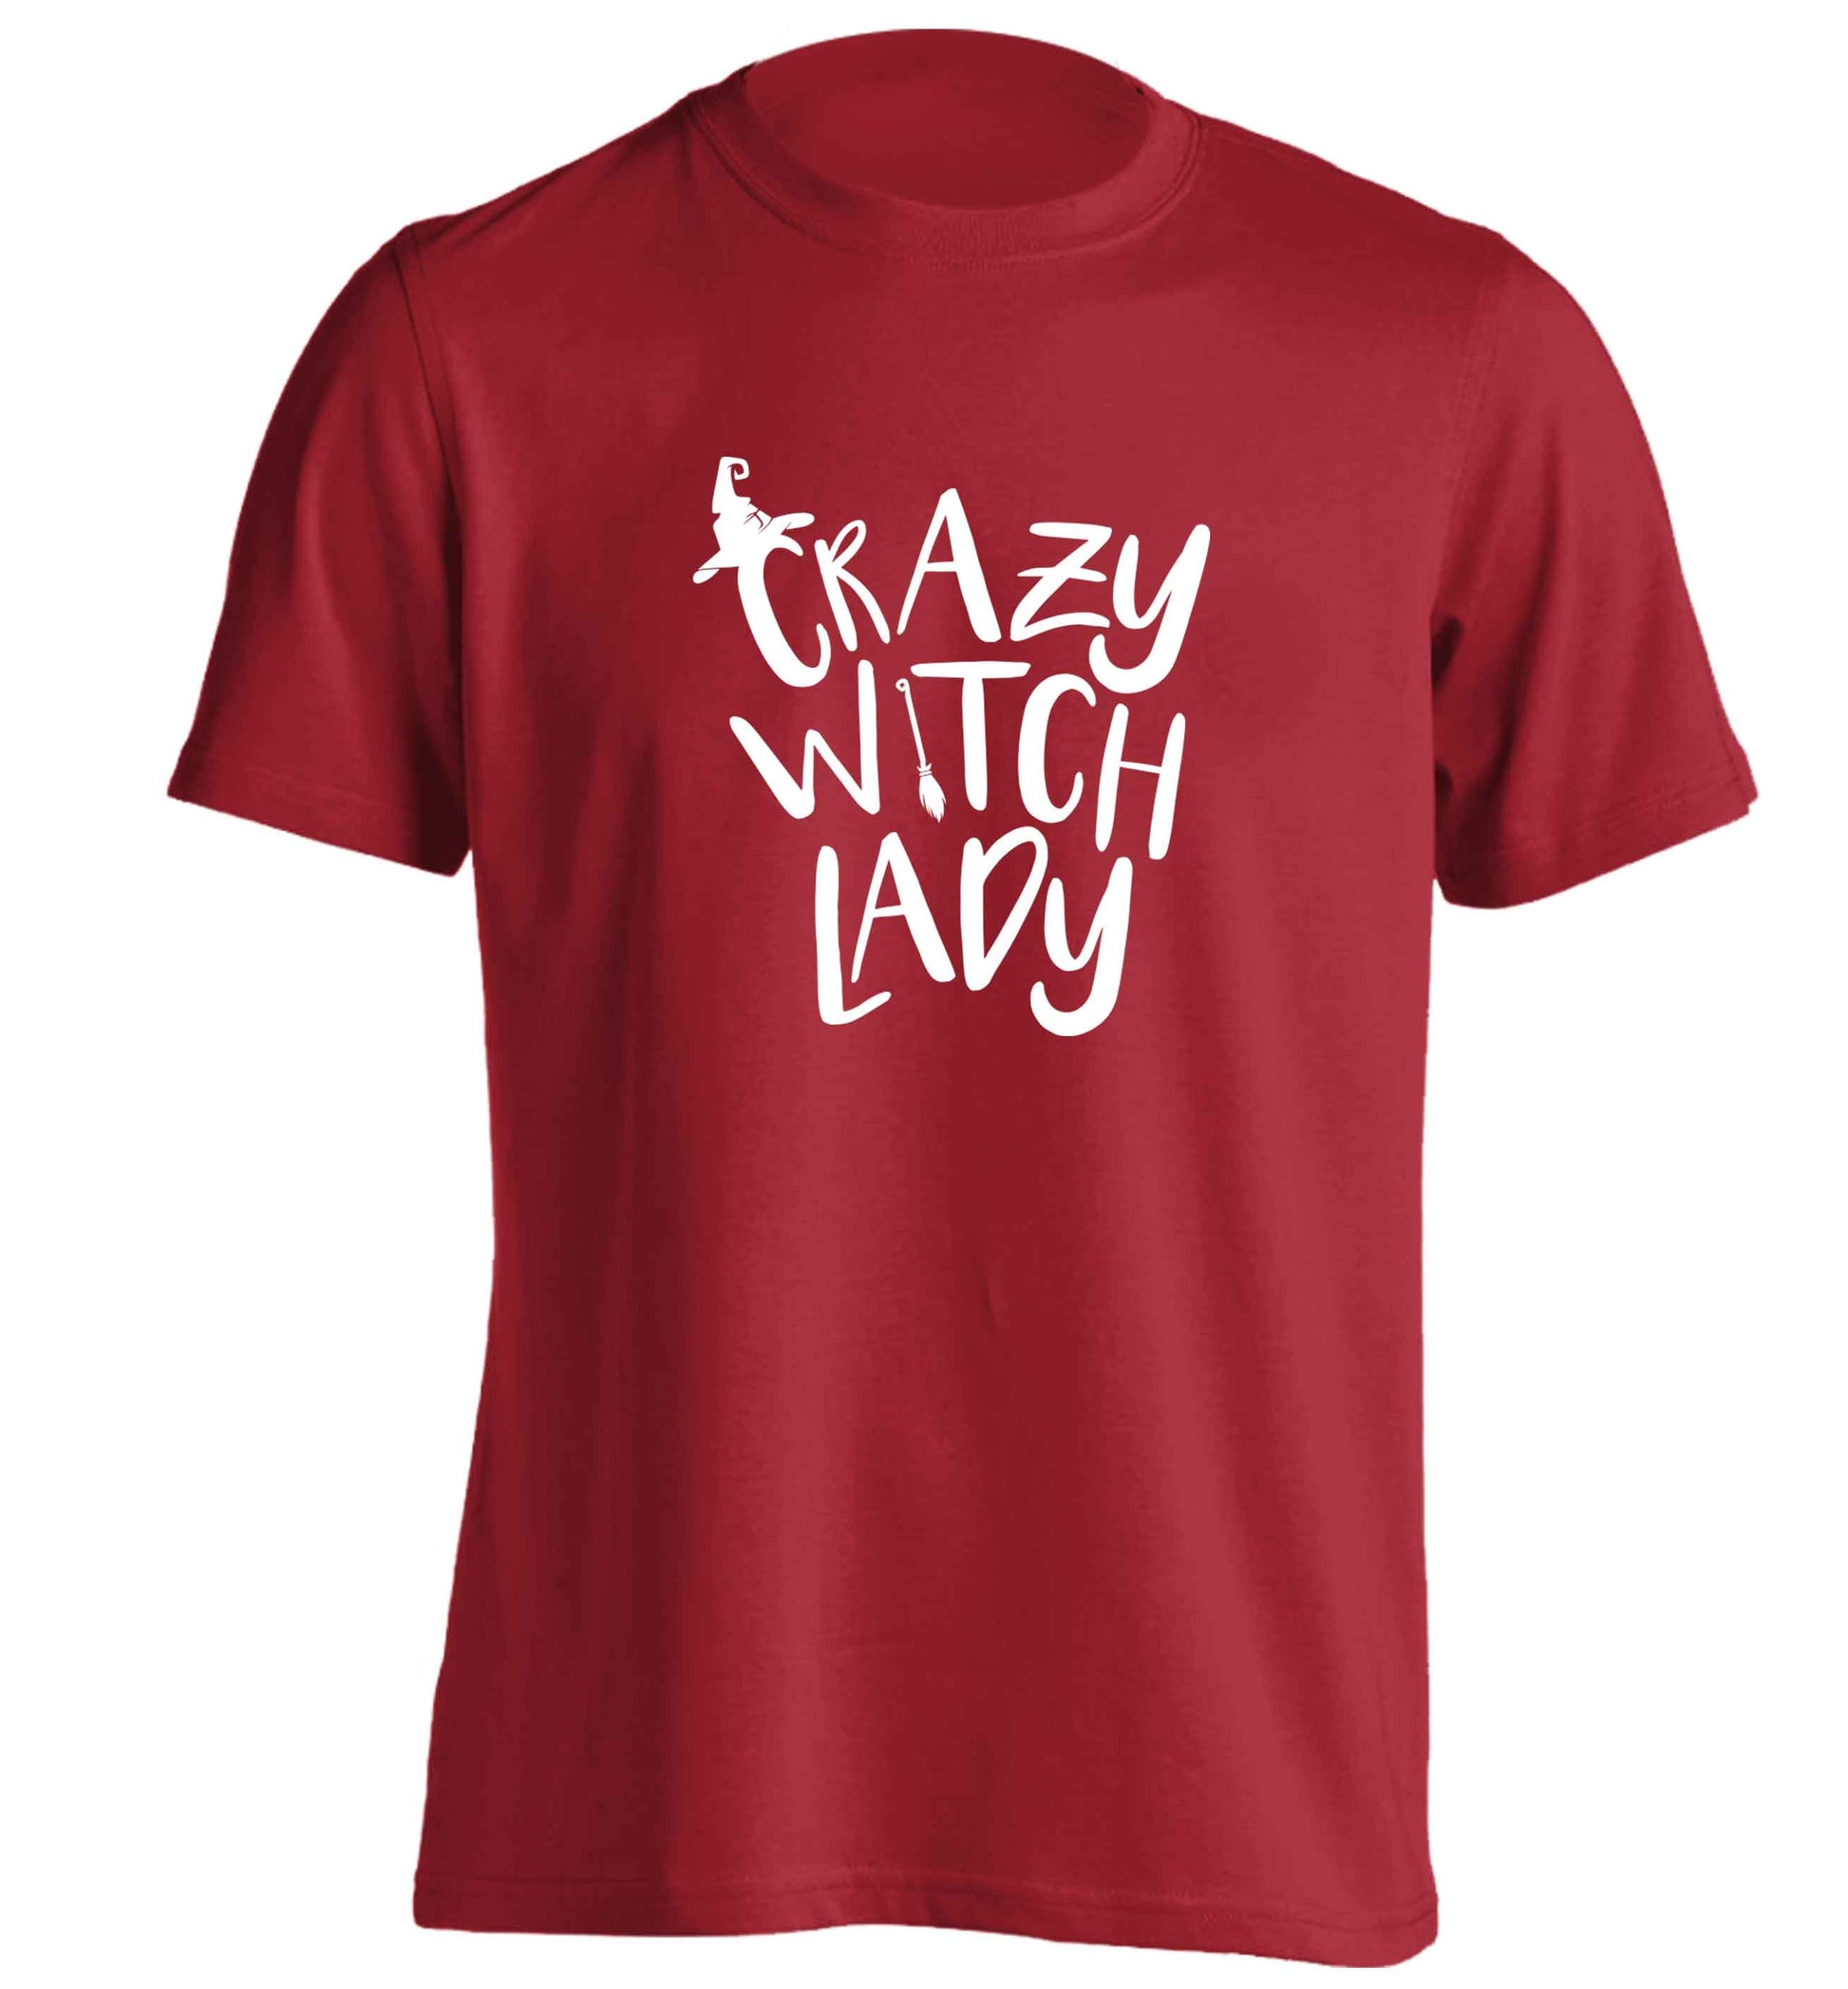 Crazy witch lady adults unisex red Tshirt 2XL